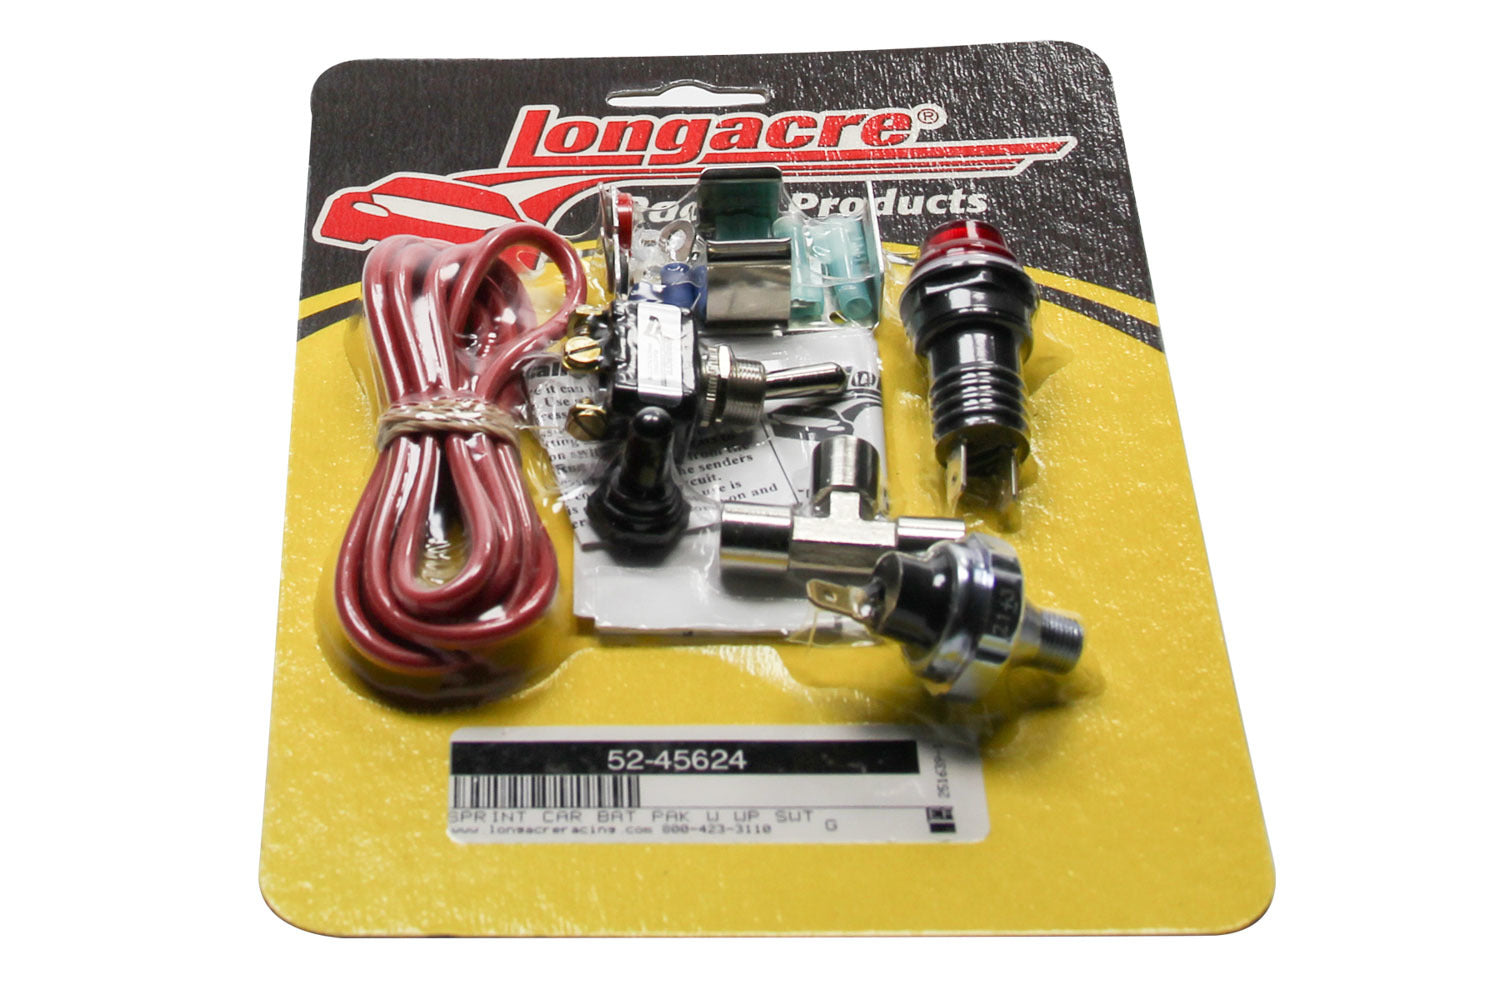 Longacre Battery Pack For Sprint Car Weatherproof Switch Gauge Components Shift/Warning Lights and Components main image